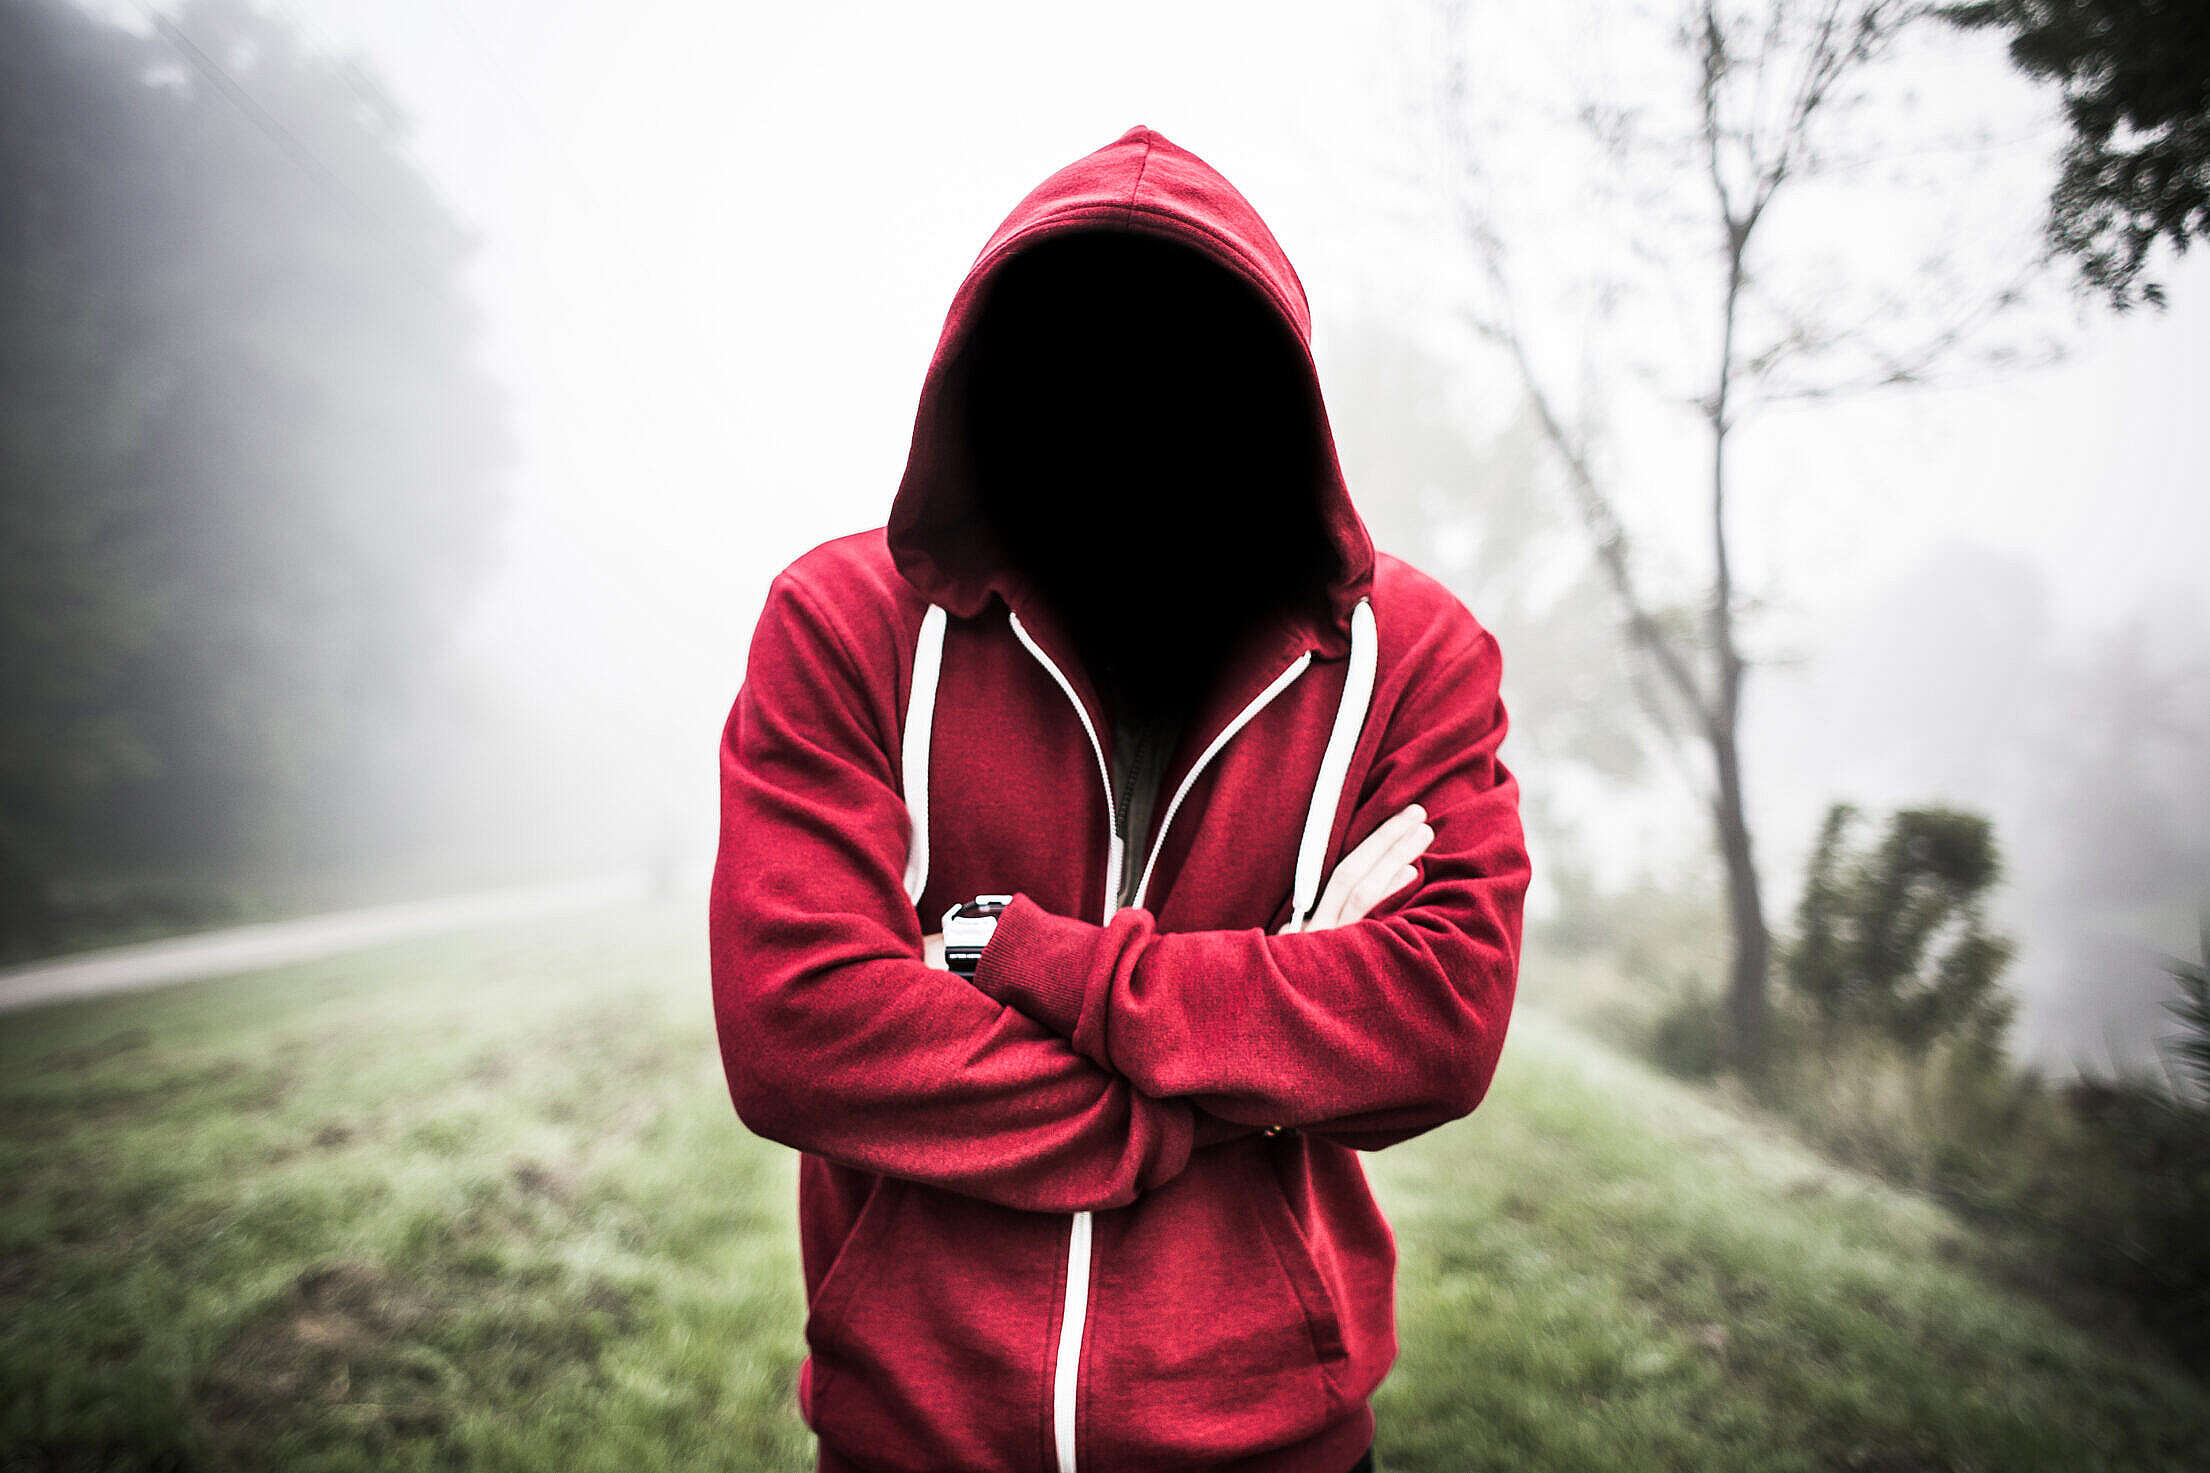 Creepy Man Without a Face in a Hoodie Free Stock Photo